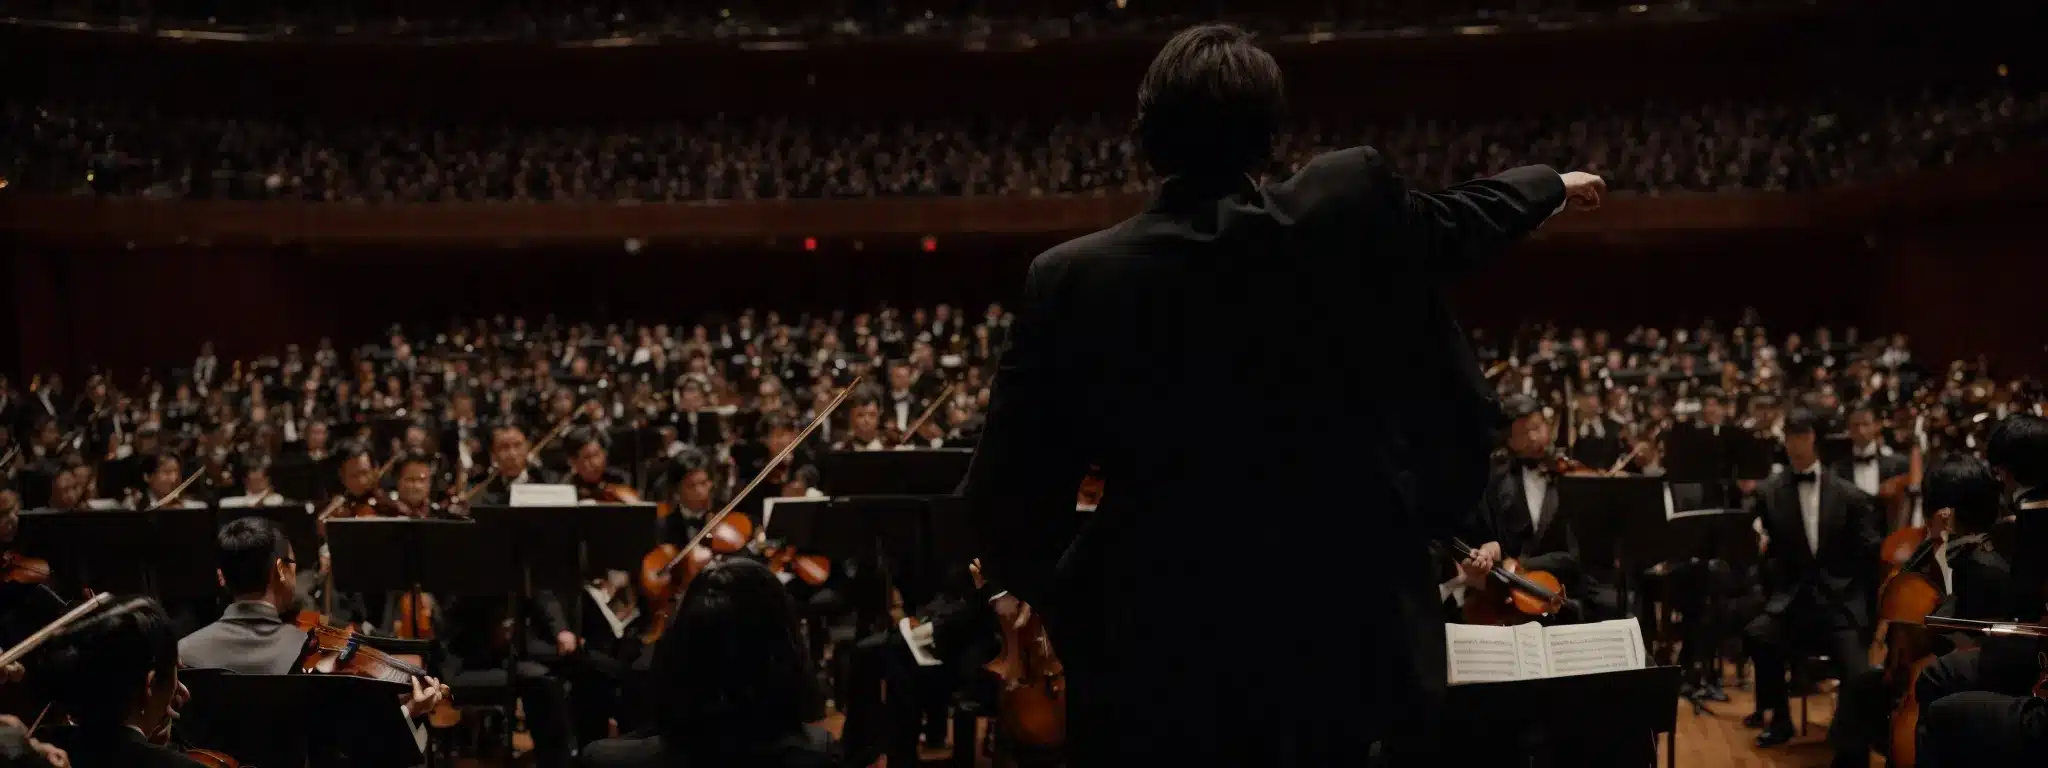 A Conductor Standing Before An Orchestra, Baton Raised, Ready To Lead A Harmonious Performance.